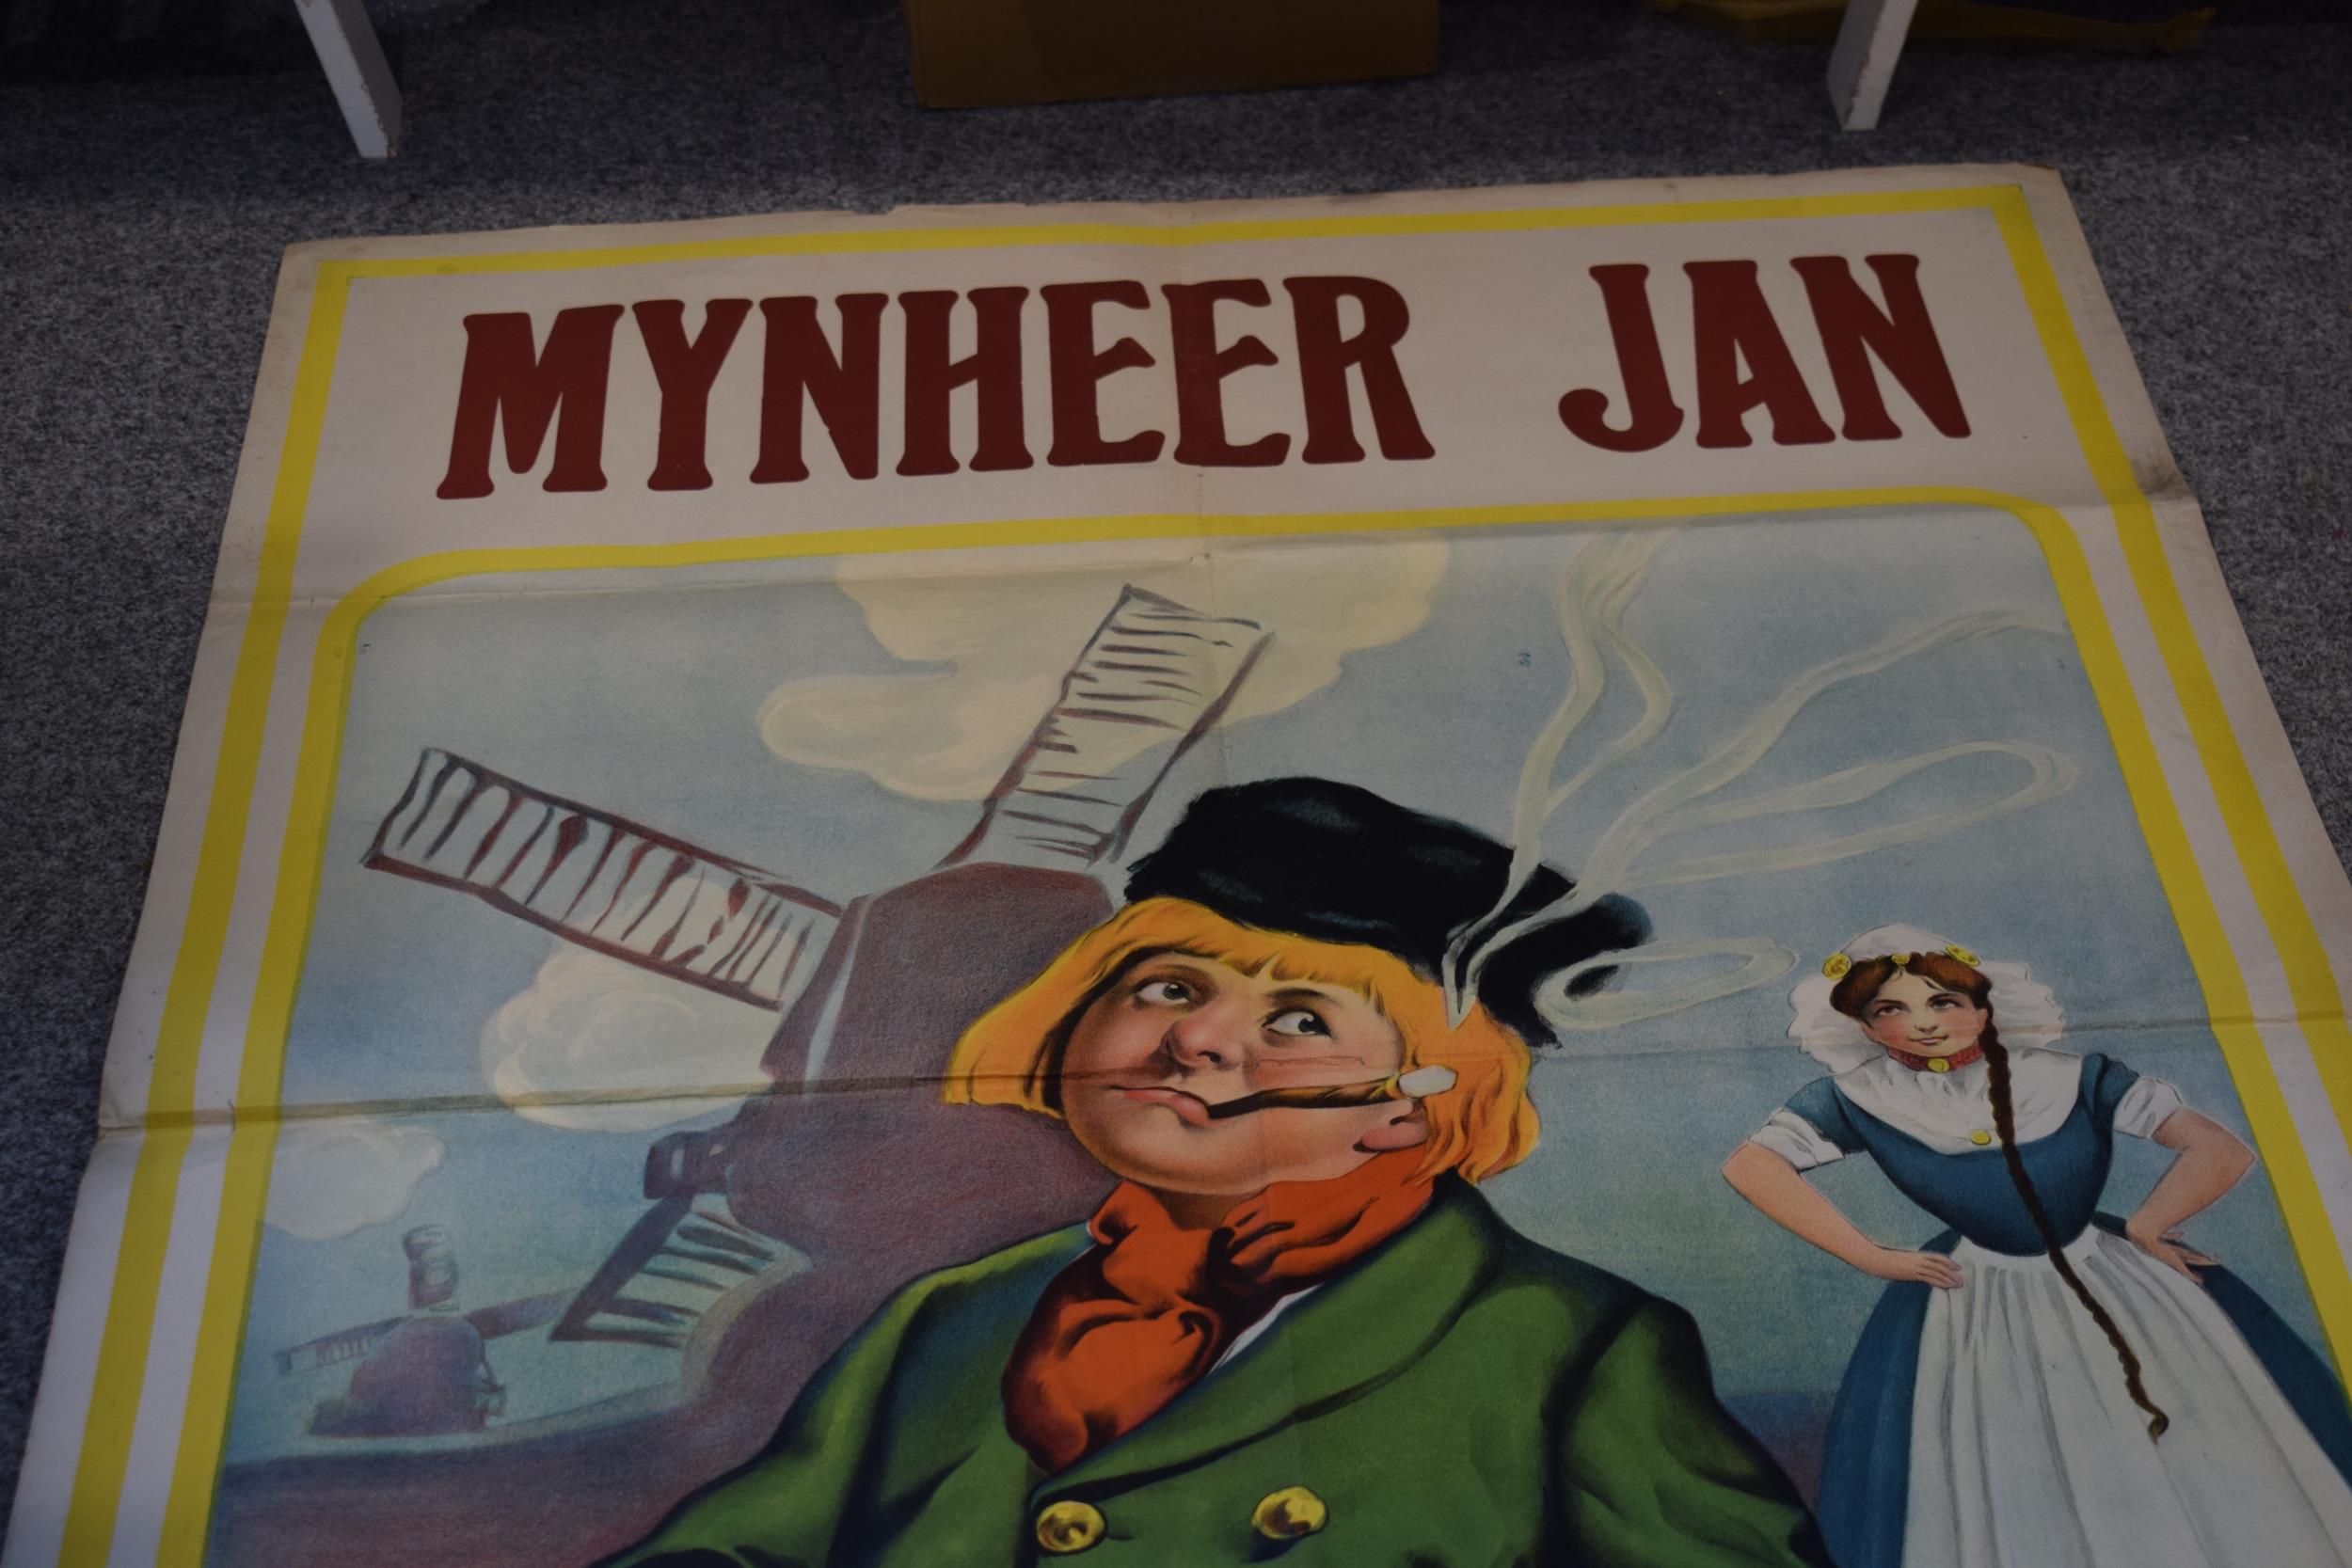 Original Colour Advertising Poster For Mynheer Jan Opera By Jacobowski c1924 in two separate - Image 3 of 7